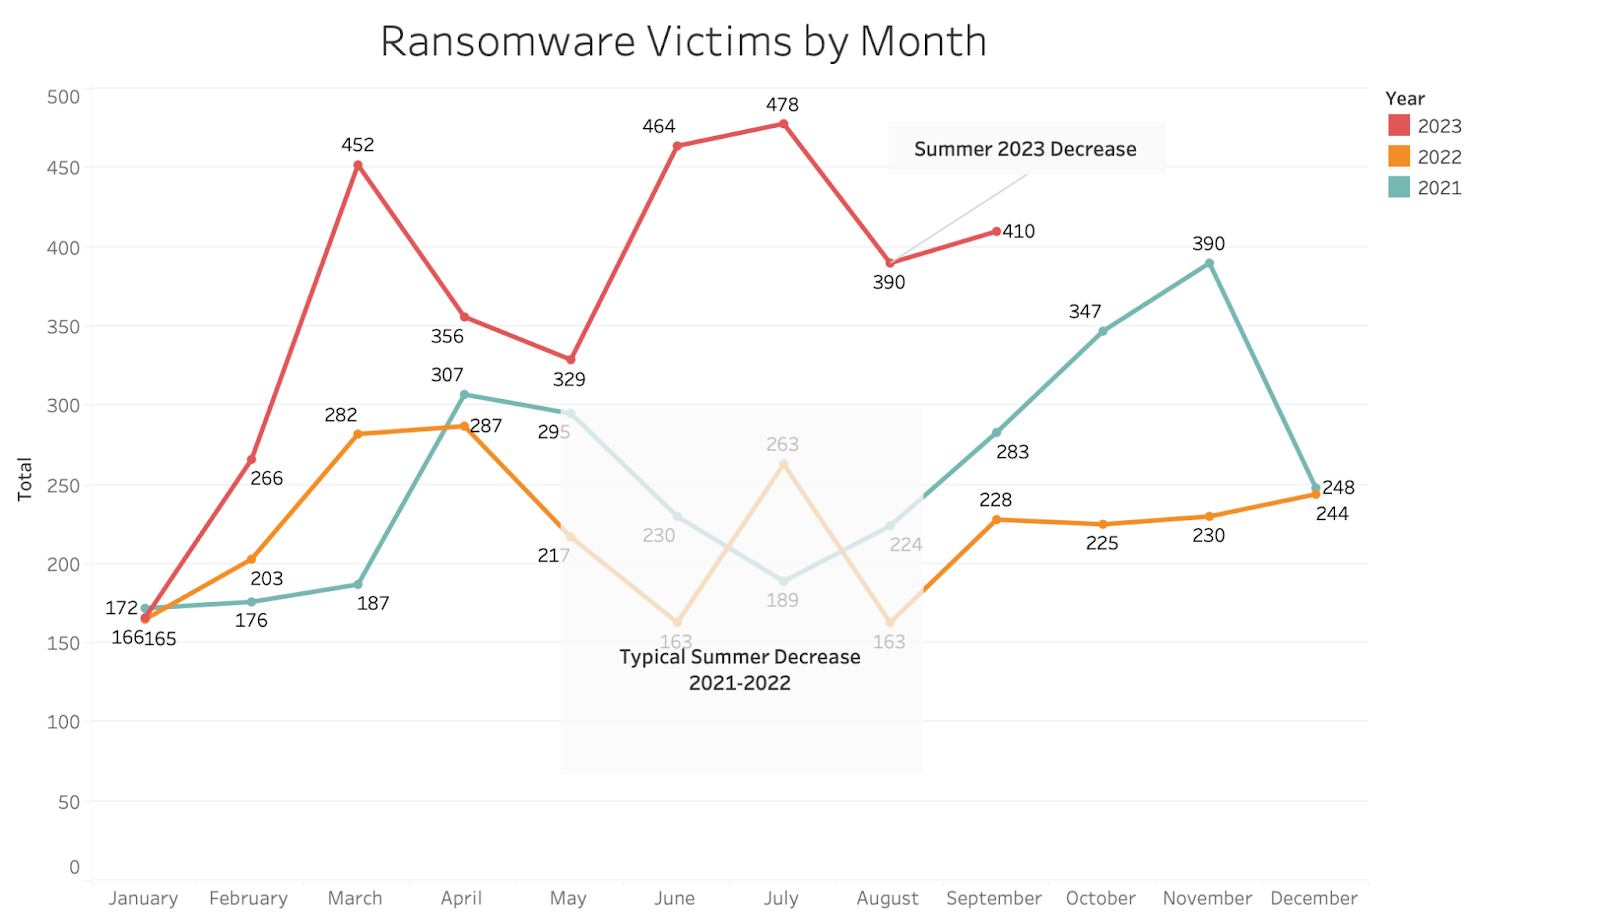 [LINE GRAPH] Ransomware Victims by Month from Jan. 2021 - Sep. 2023